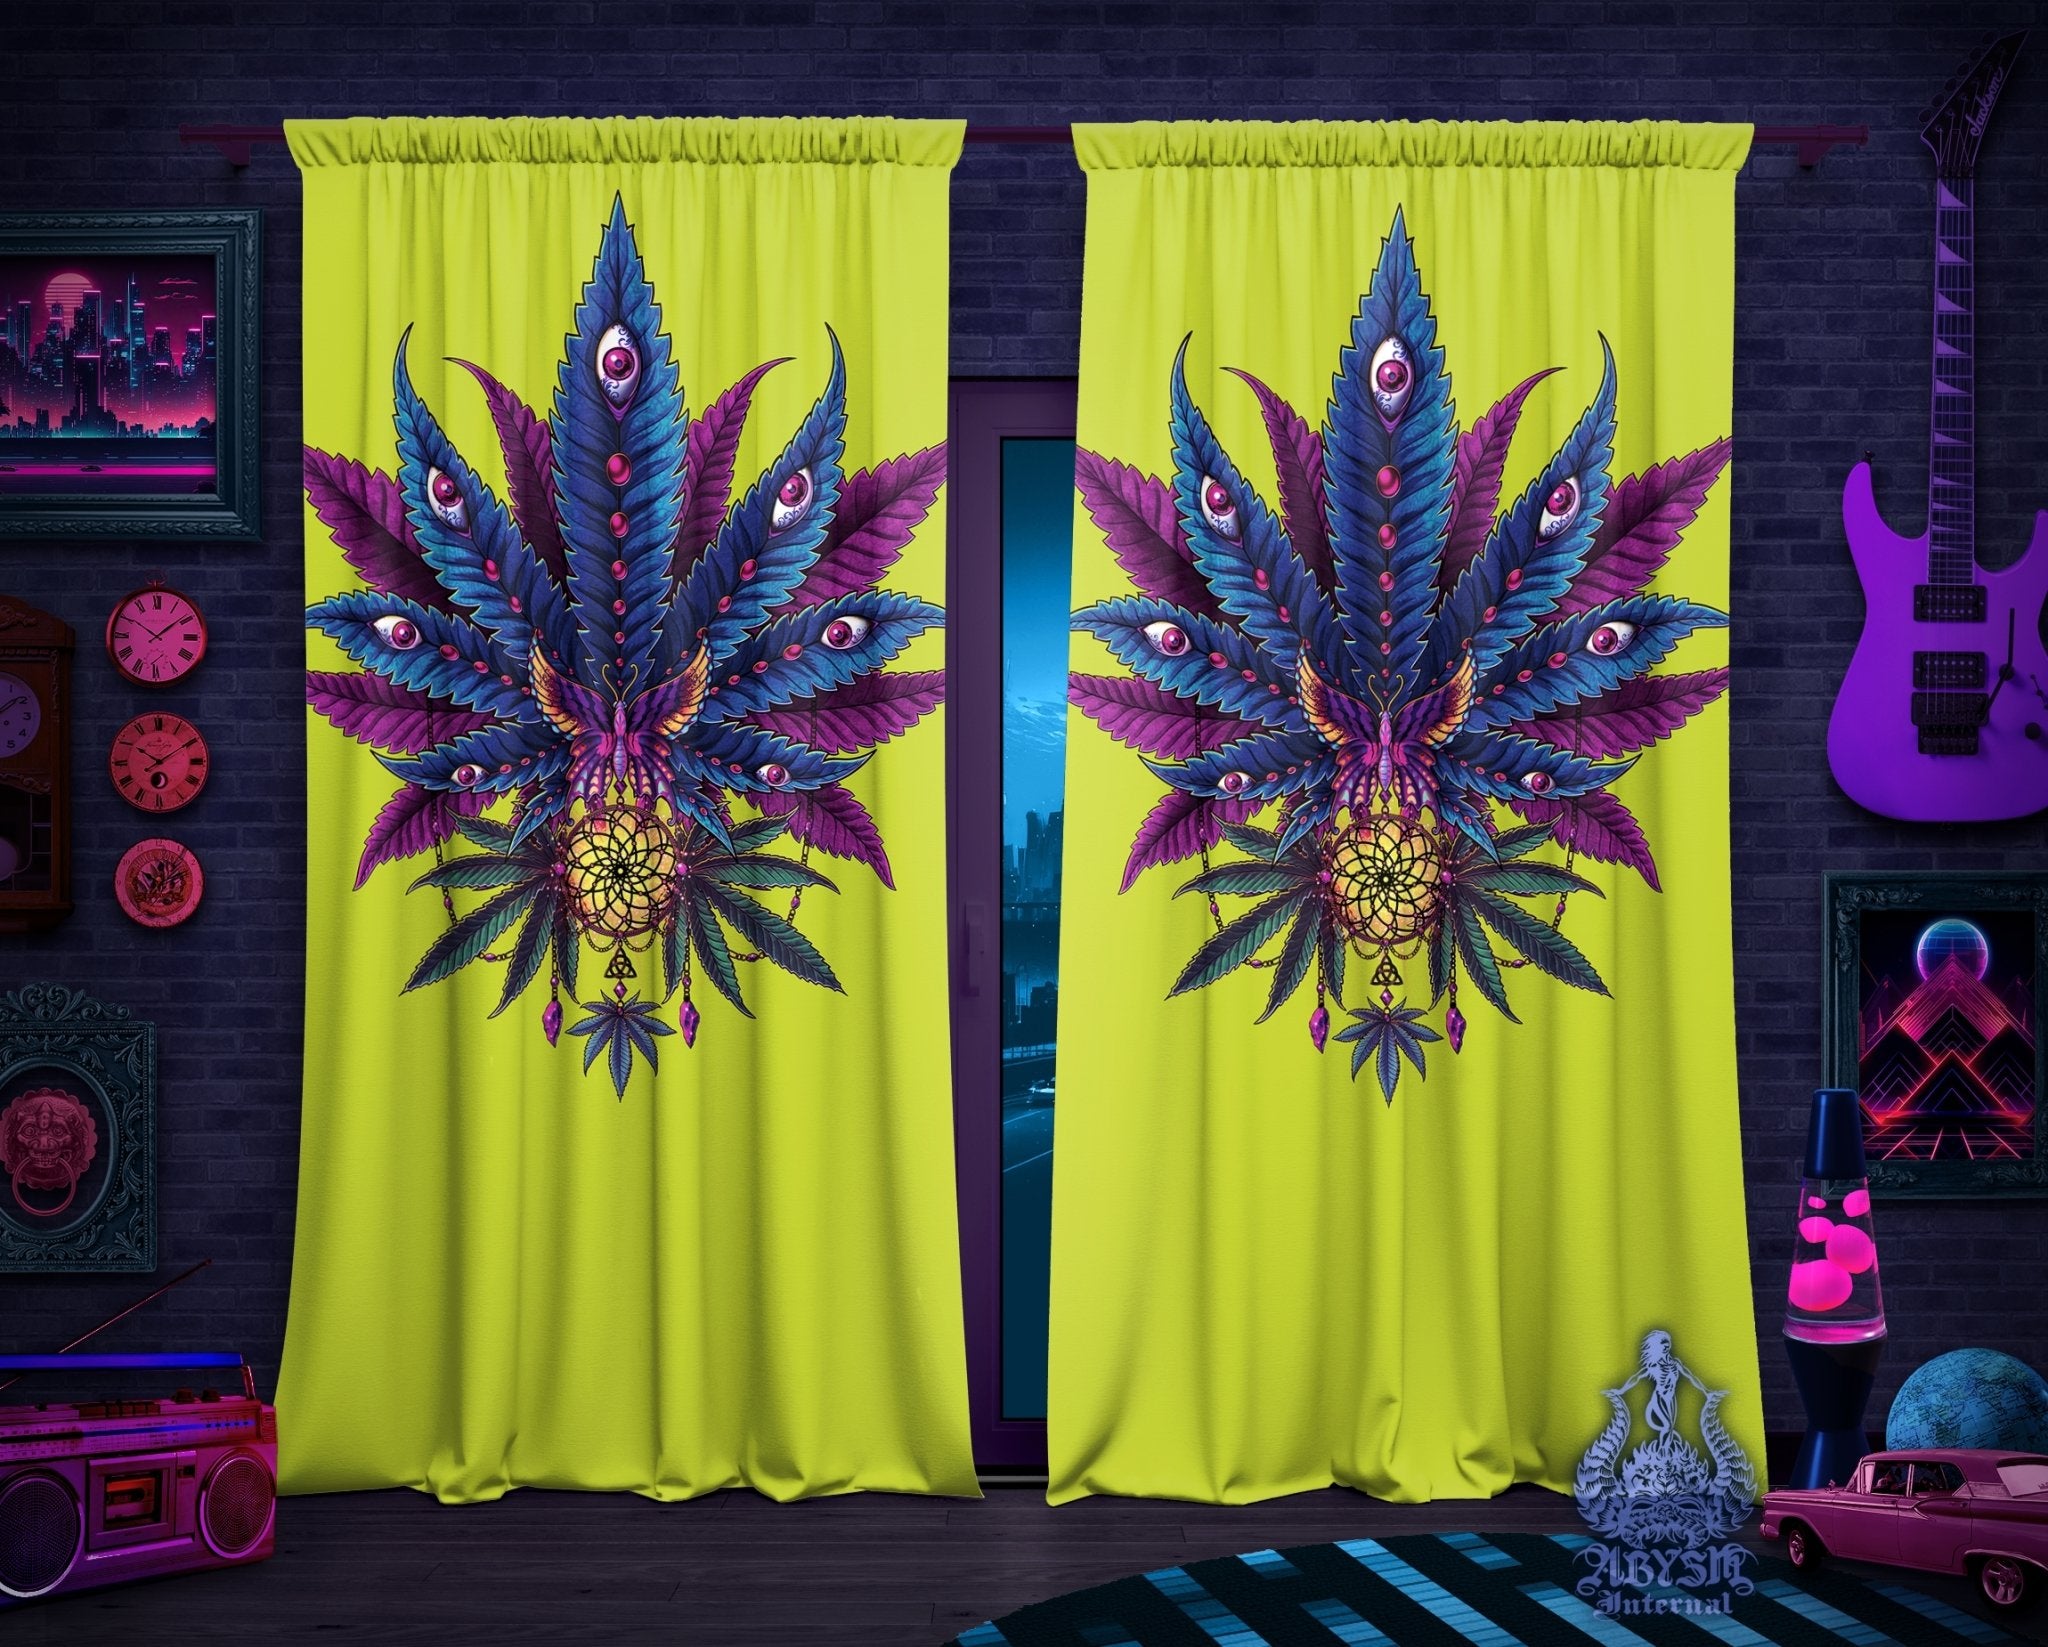 Weed Blackout Curtains, Cannabis Home and Shop Decor, Long Window Panels, Psychedelic Print, 420 Room 80s Art - Neon II - Abysm Internal